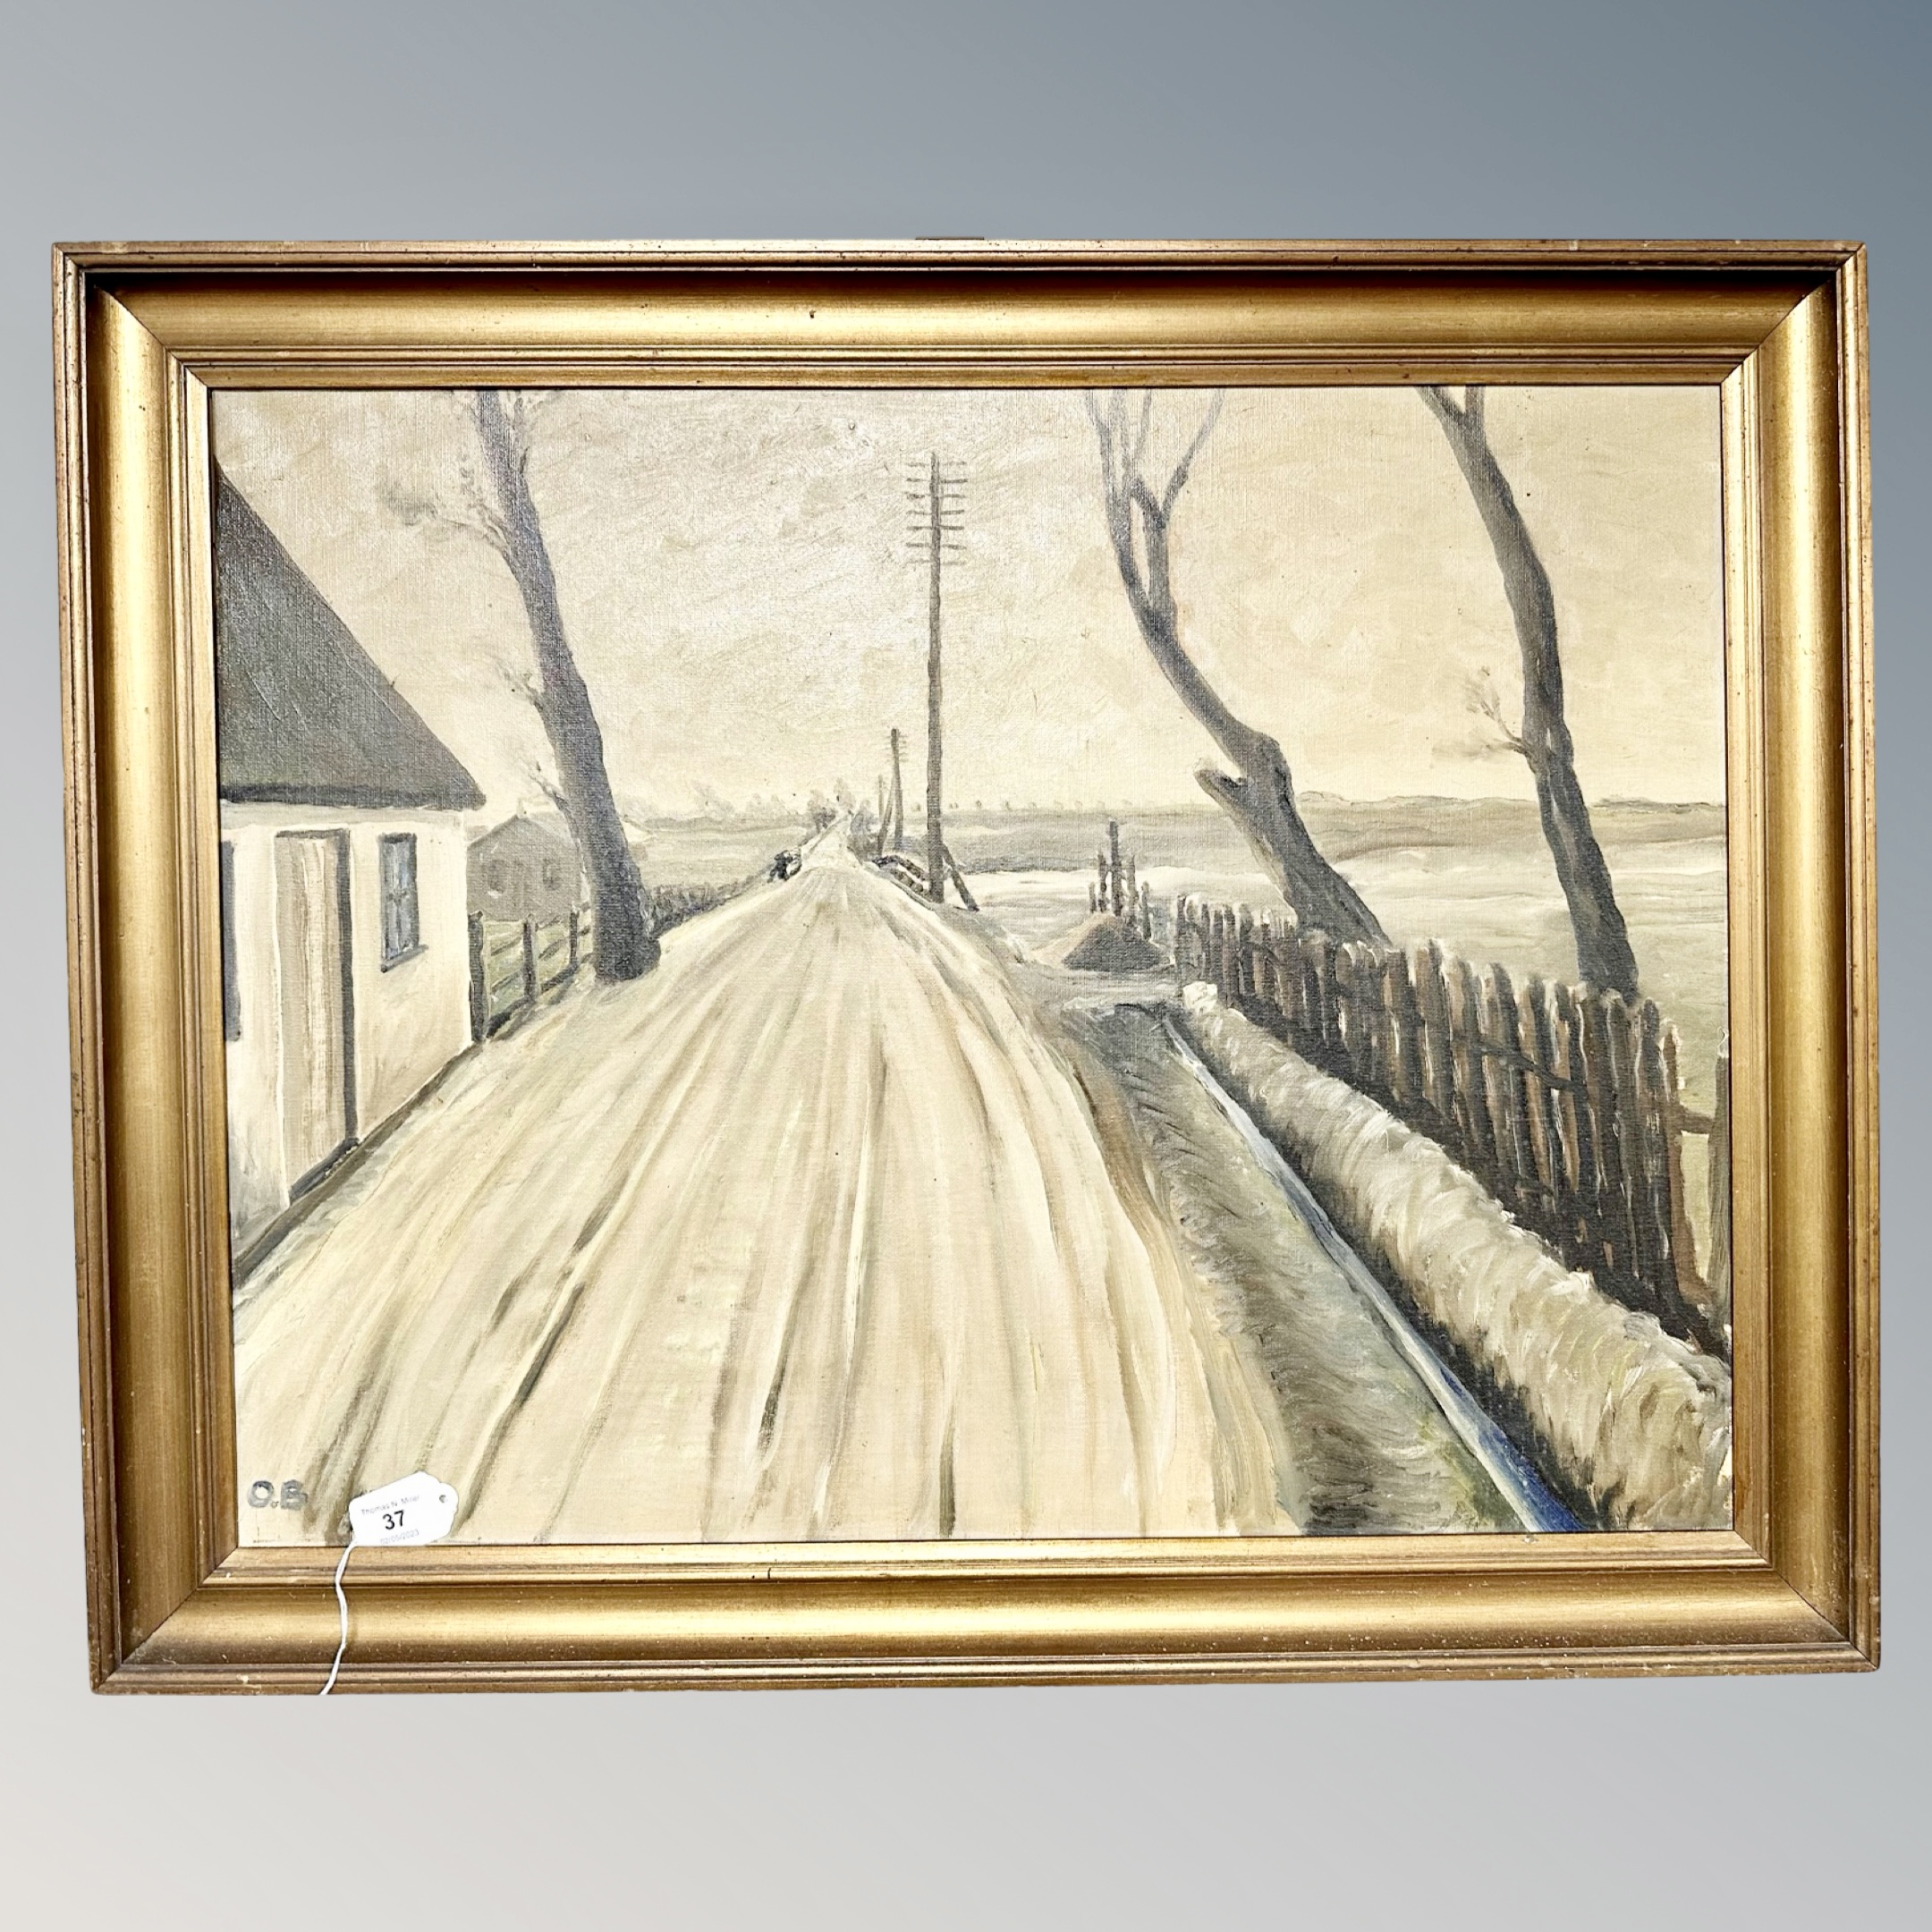 Continental school : Snow on a road, oil on canvas, 65cm by 50cm.